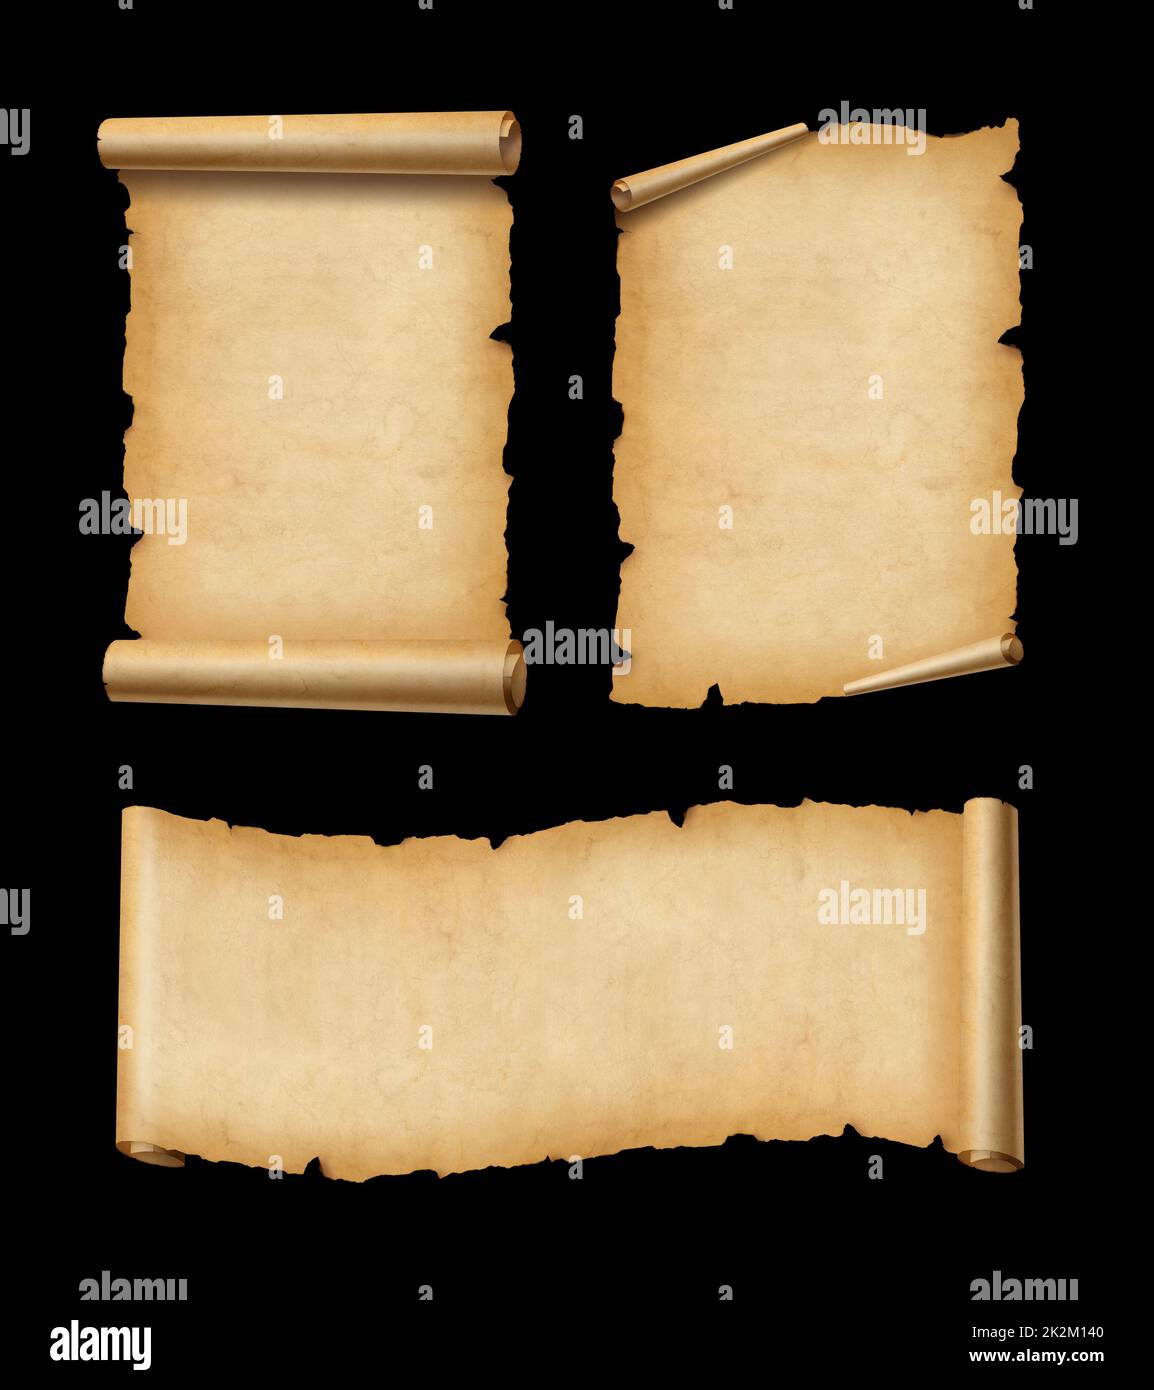 Old Parchment paper scroll set isolated on black. Horizontal and vertical banners Stock Photo